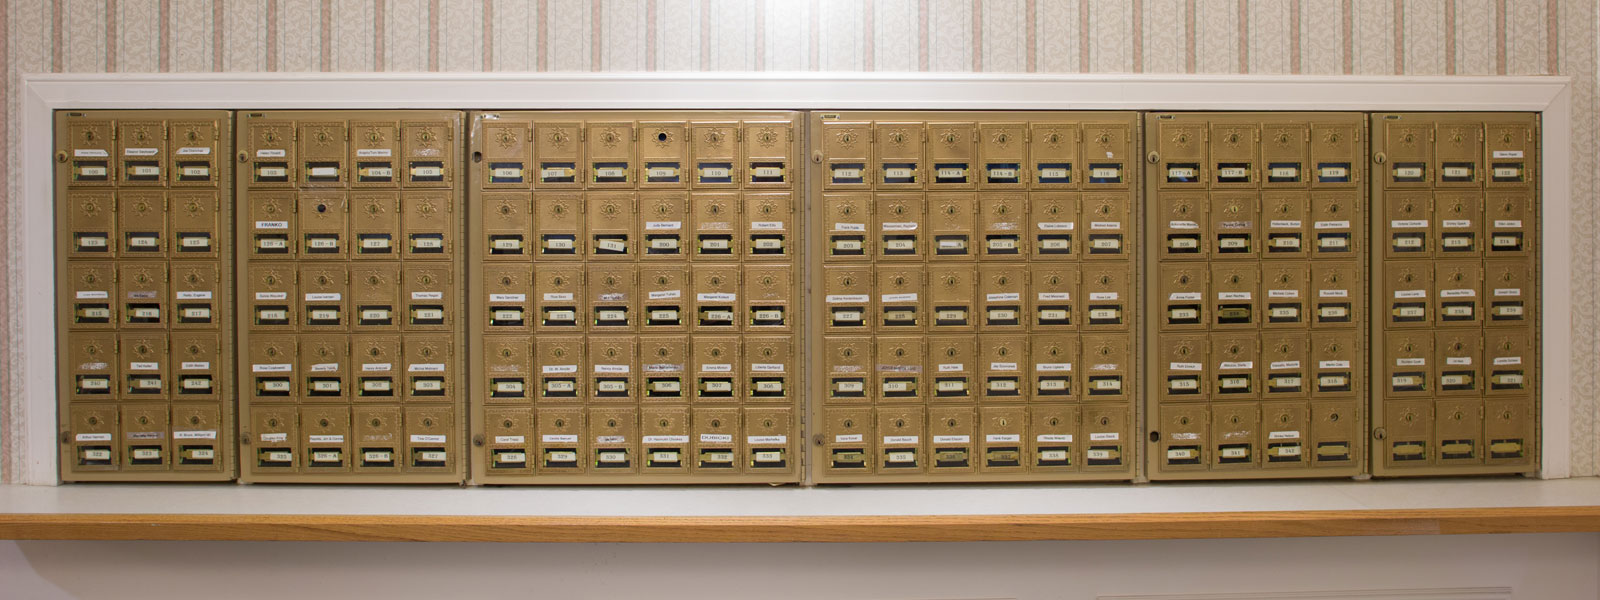 579---Mailboxes